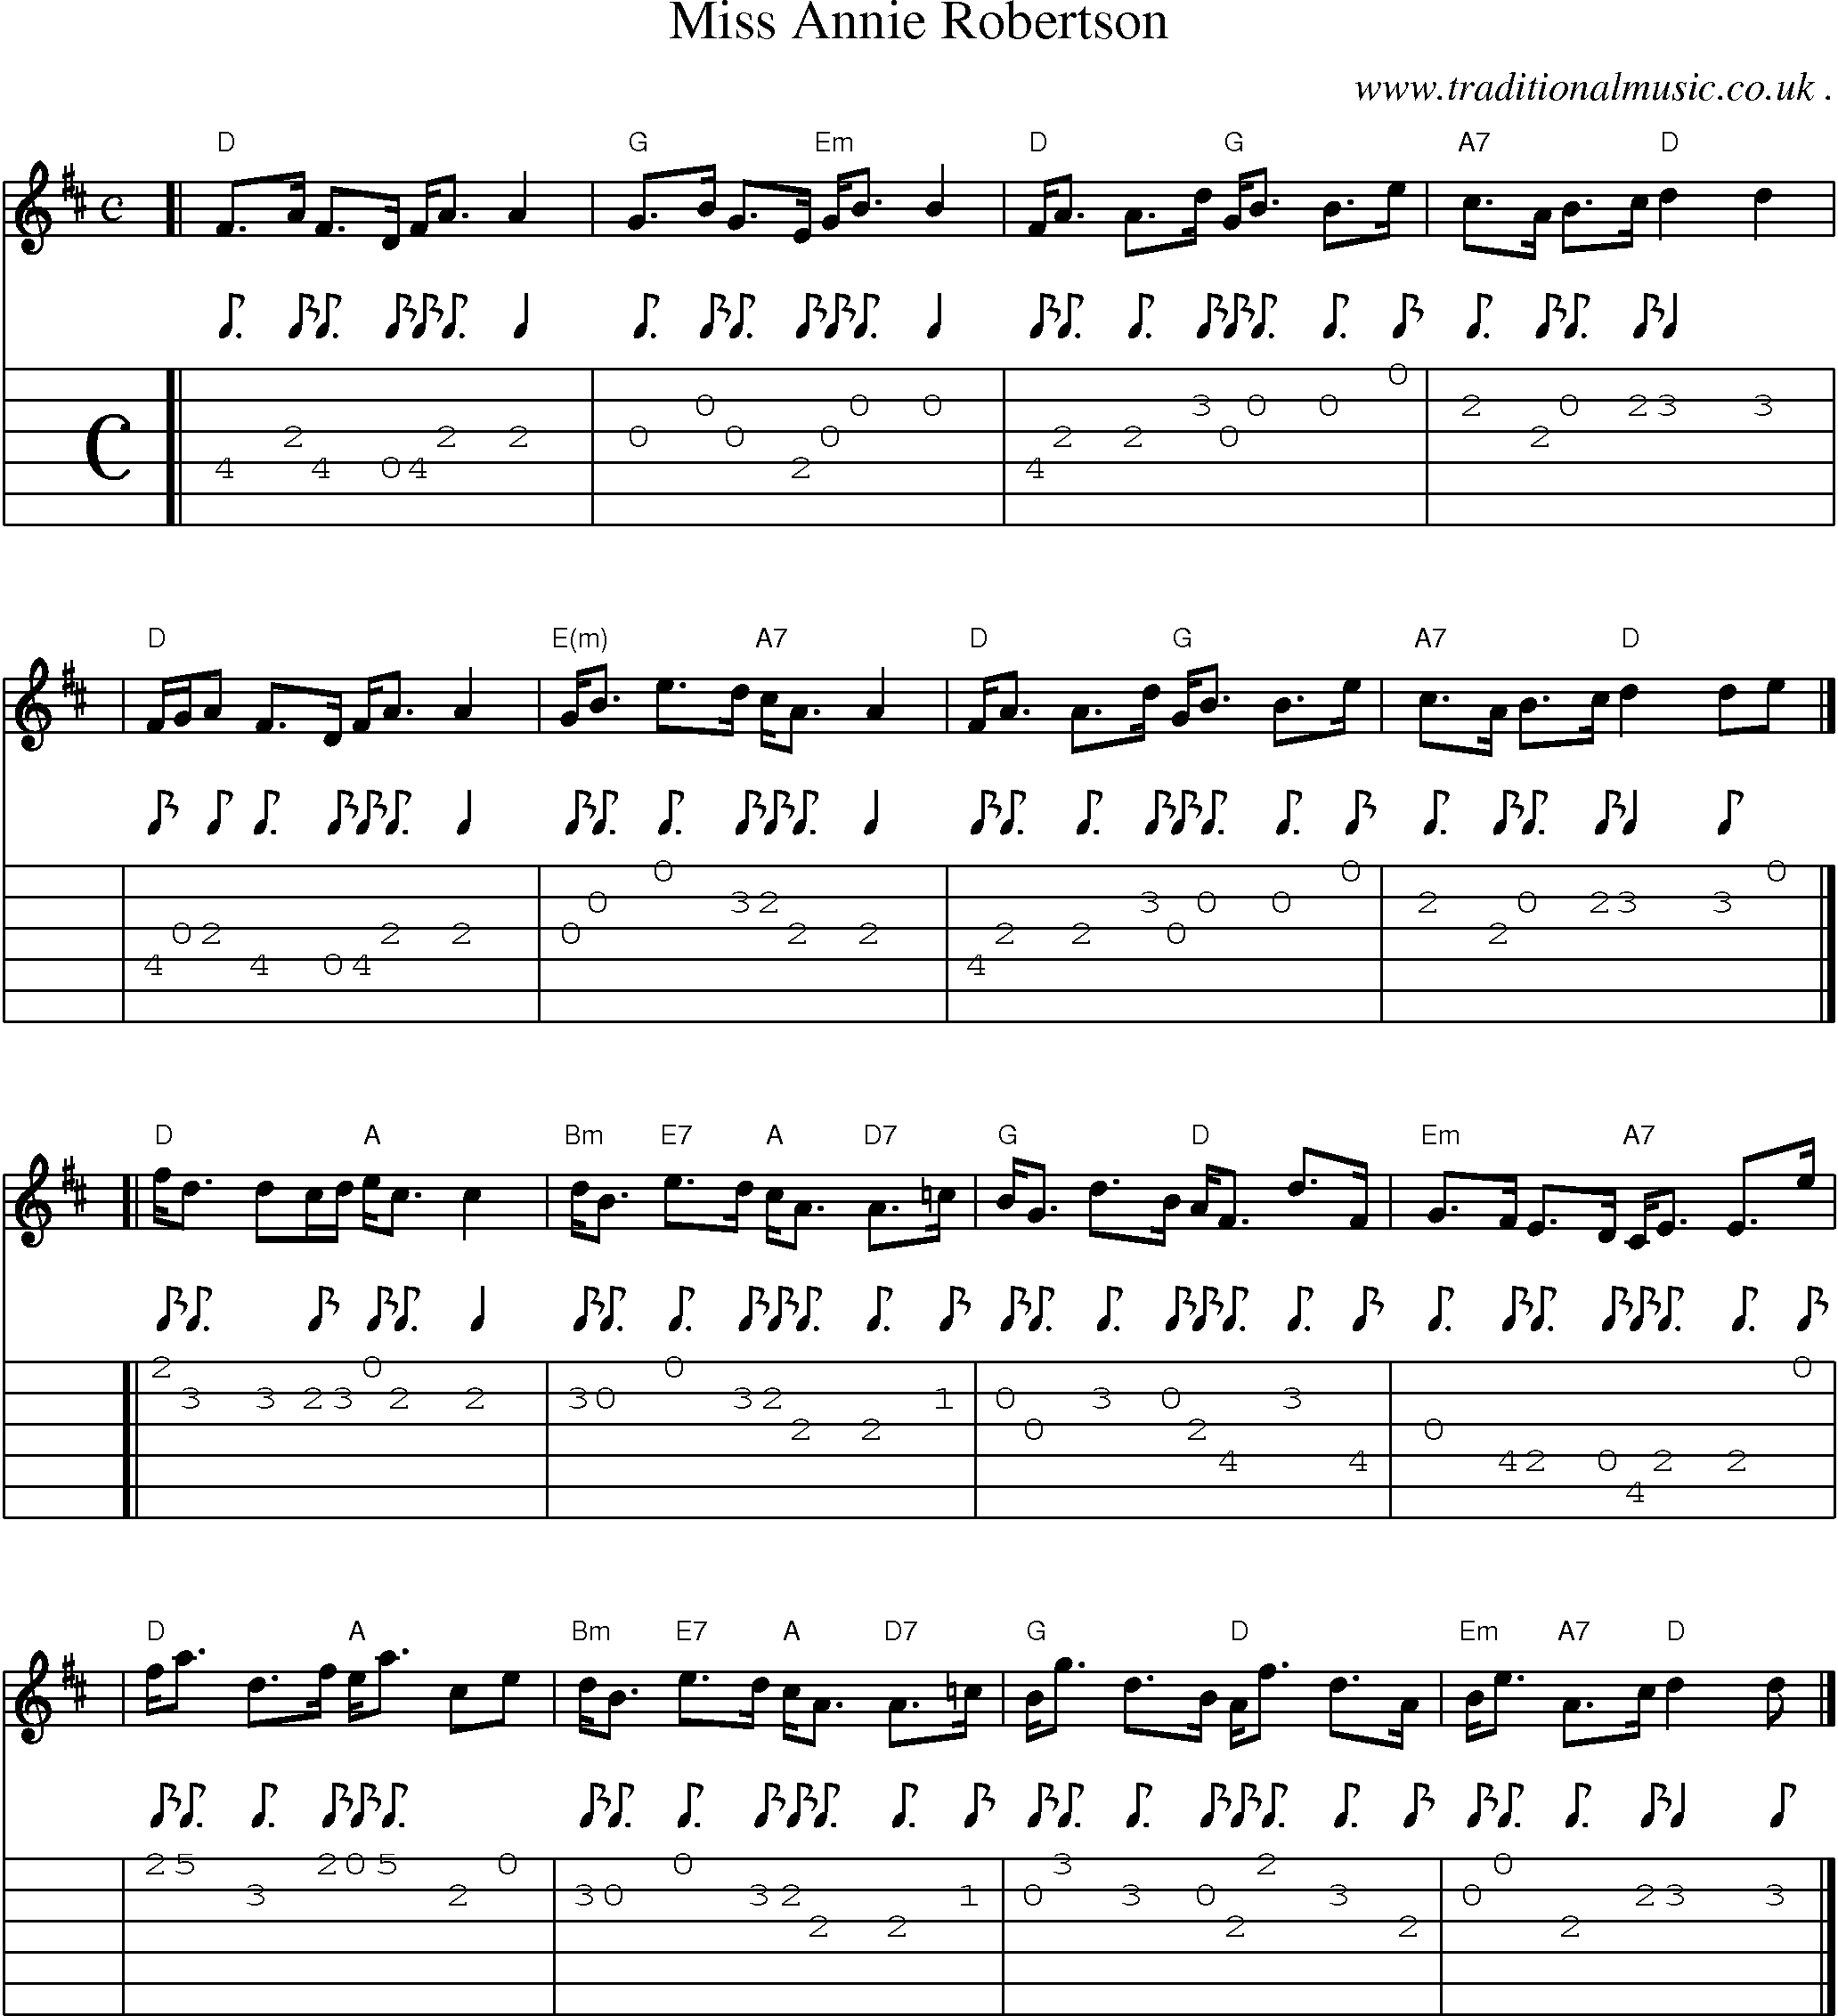 Sheet-music  score, Chords and Guitar Tabs for Miss Annie Robertson